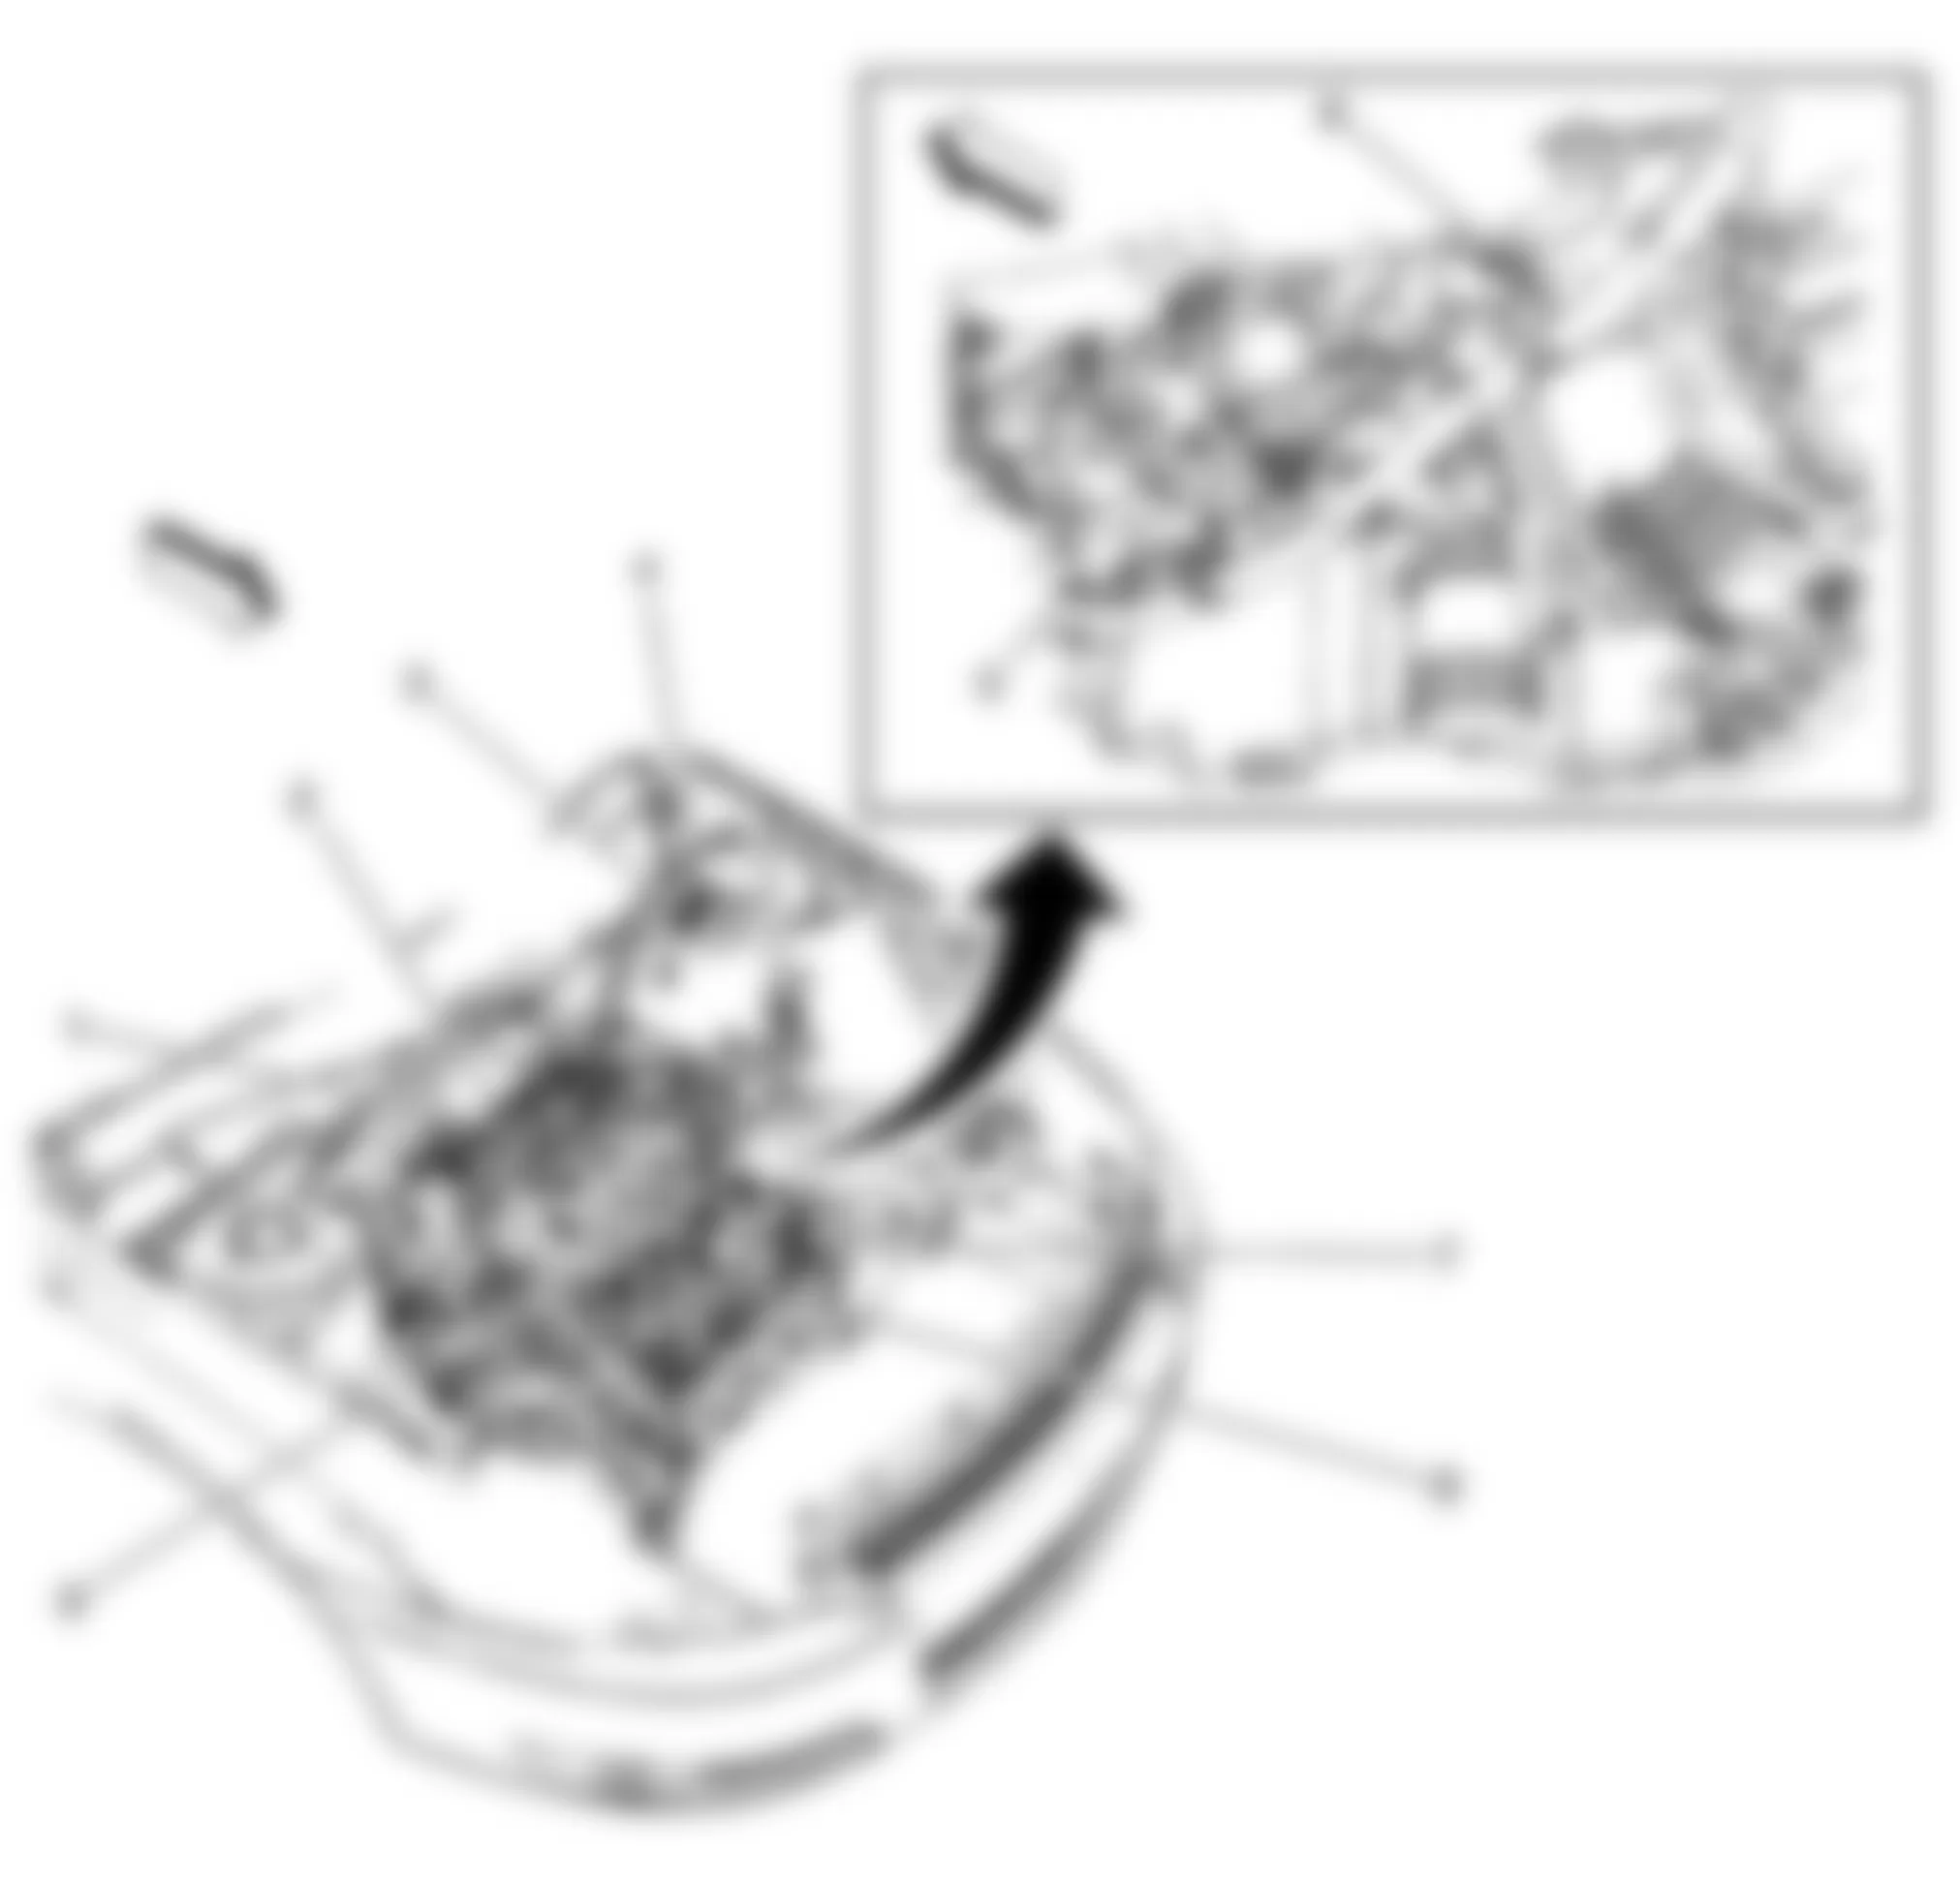 Chevrolet Impala LT 2009 - Component Locations -  Front Of Engine Compartment (5.3L)